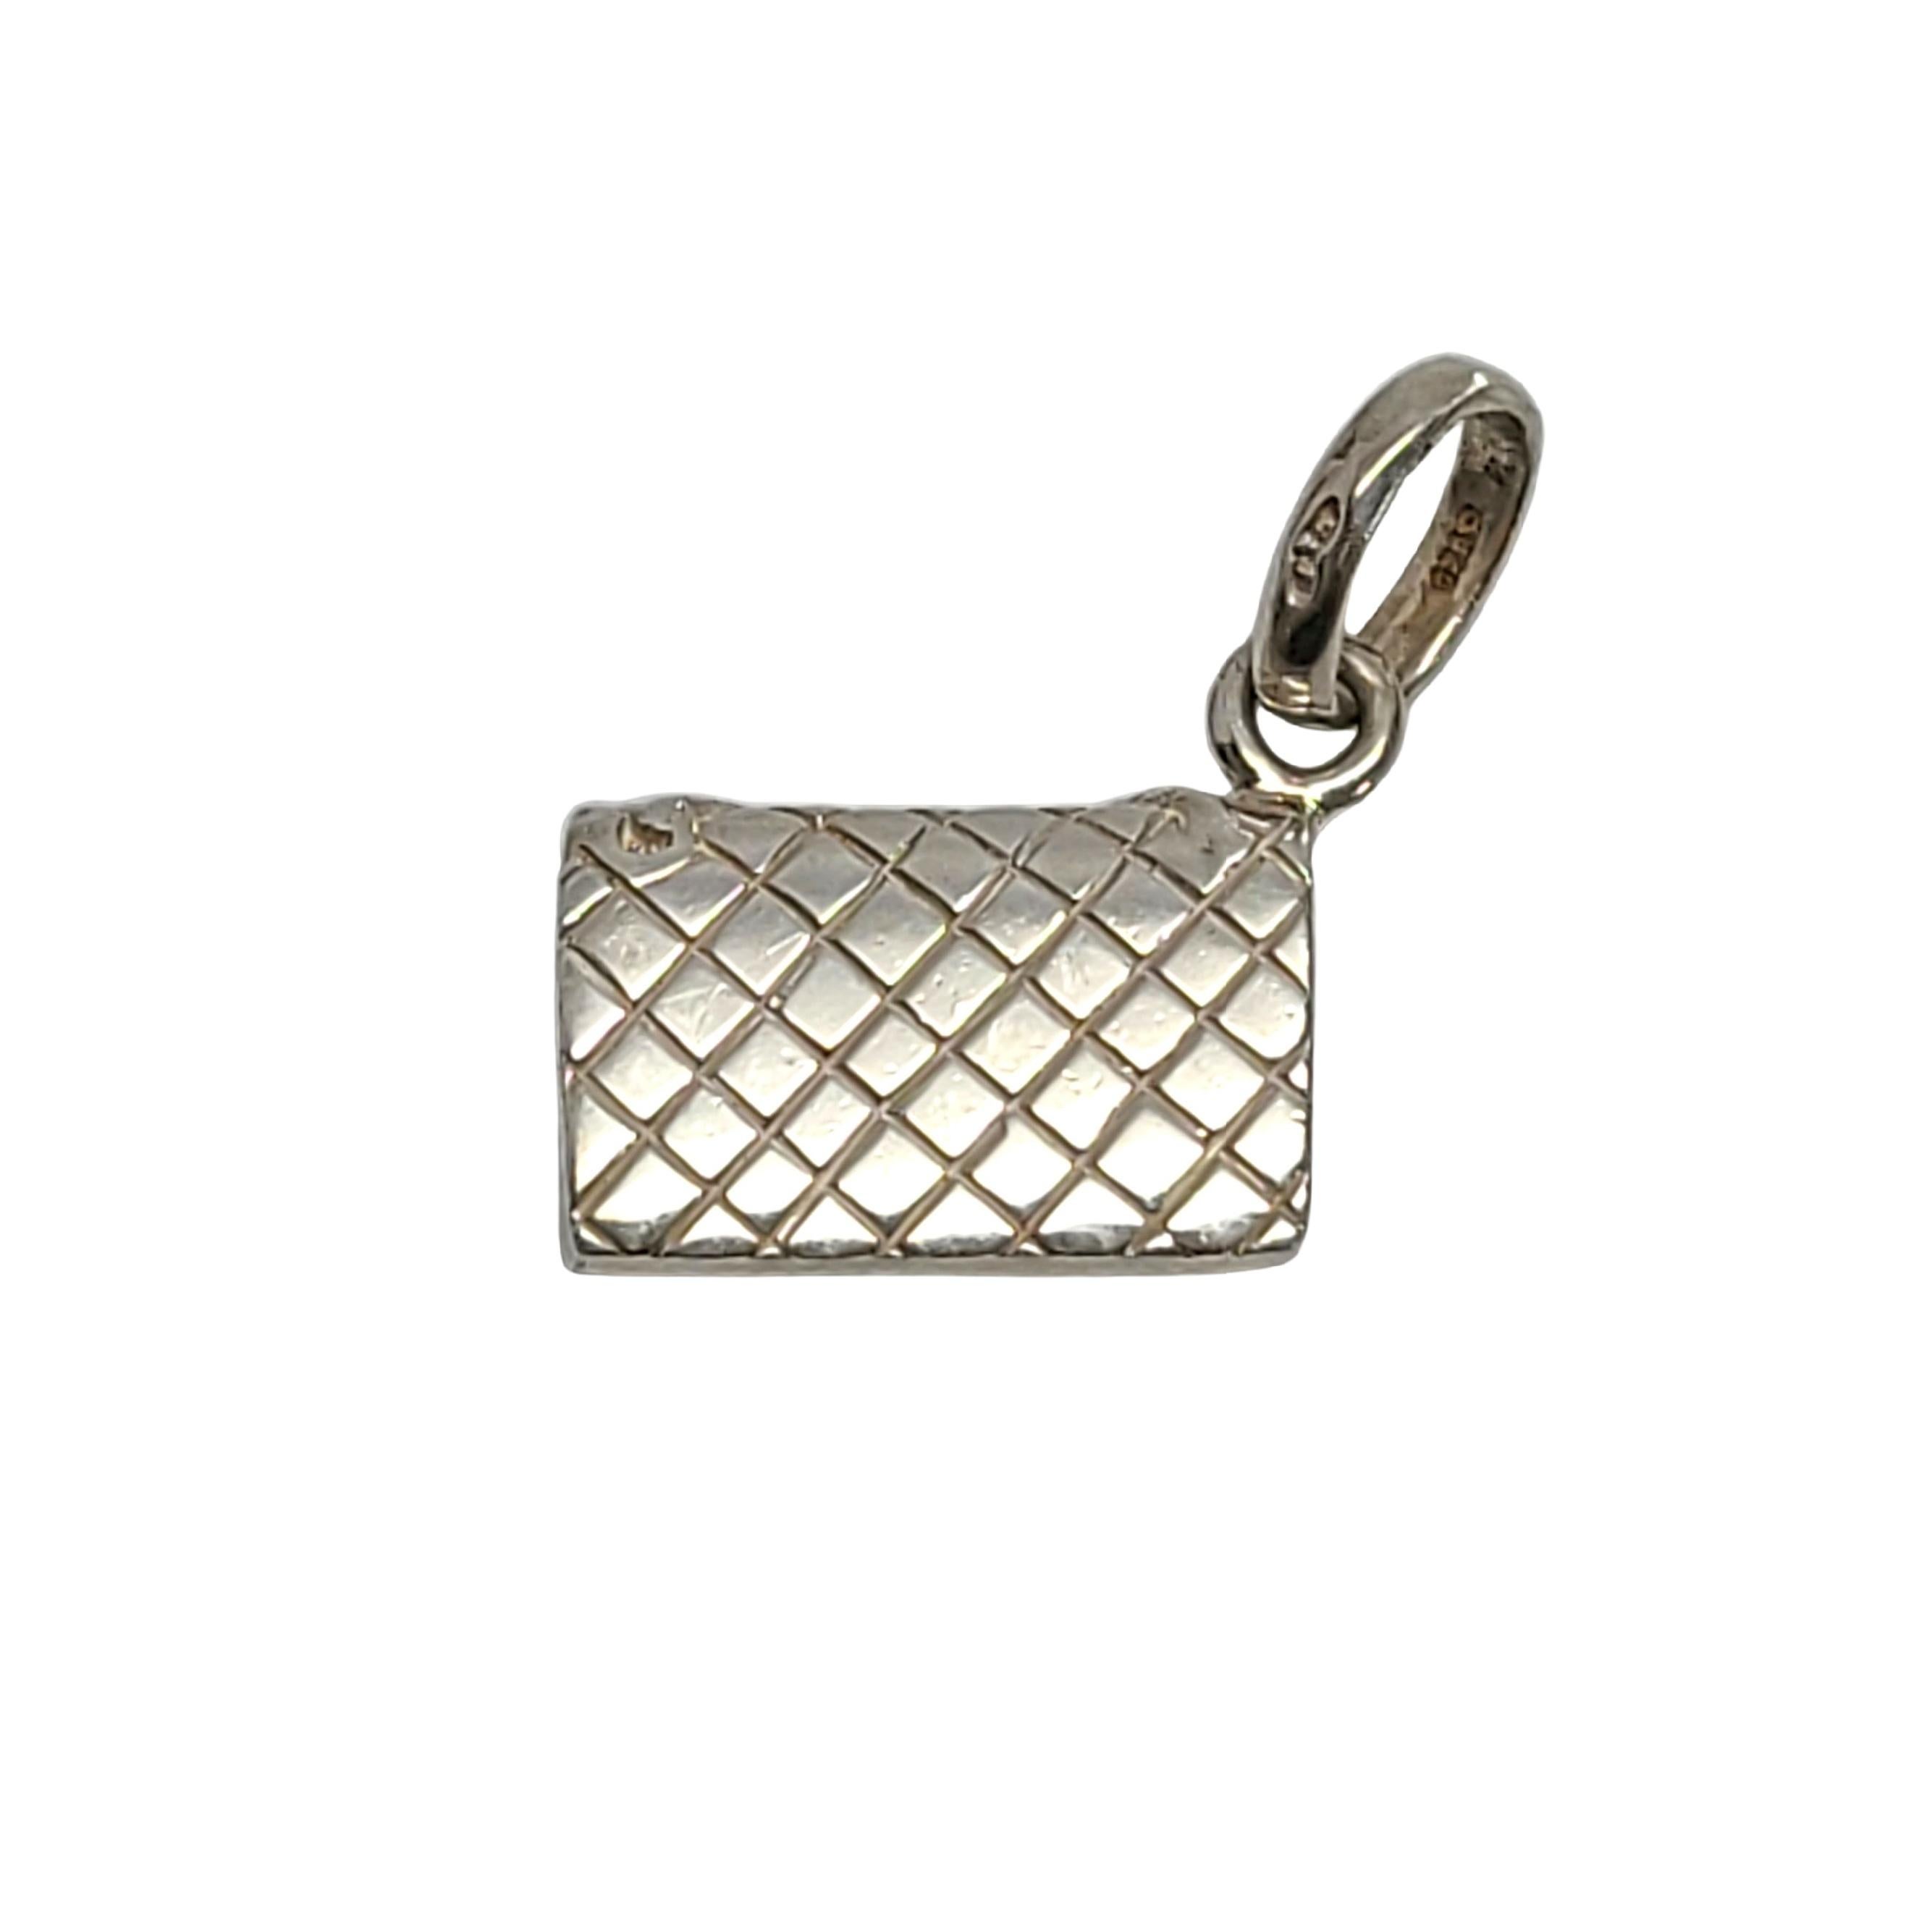 Sterling silver clutch purse charm by Links of London.

Nicely detailed purse charm.

Purse measures 3/8